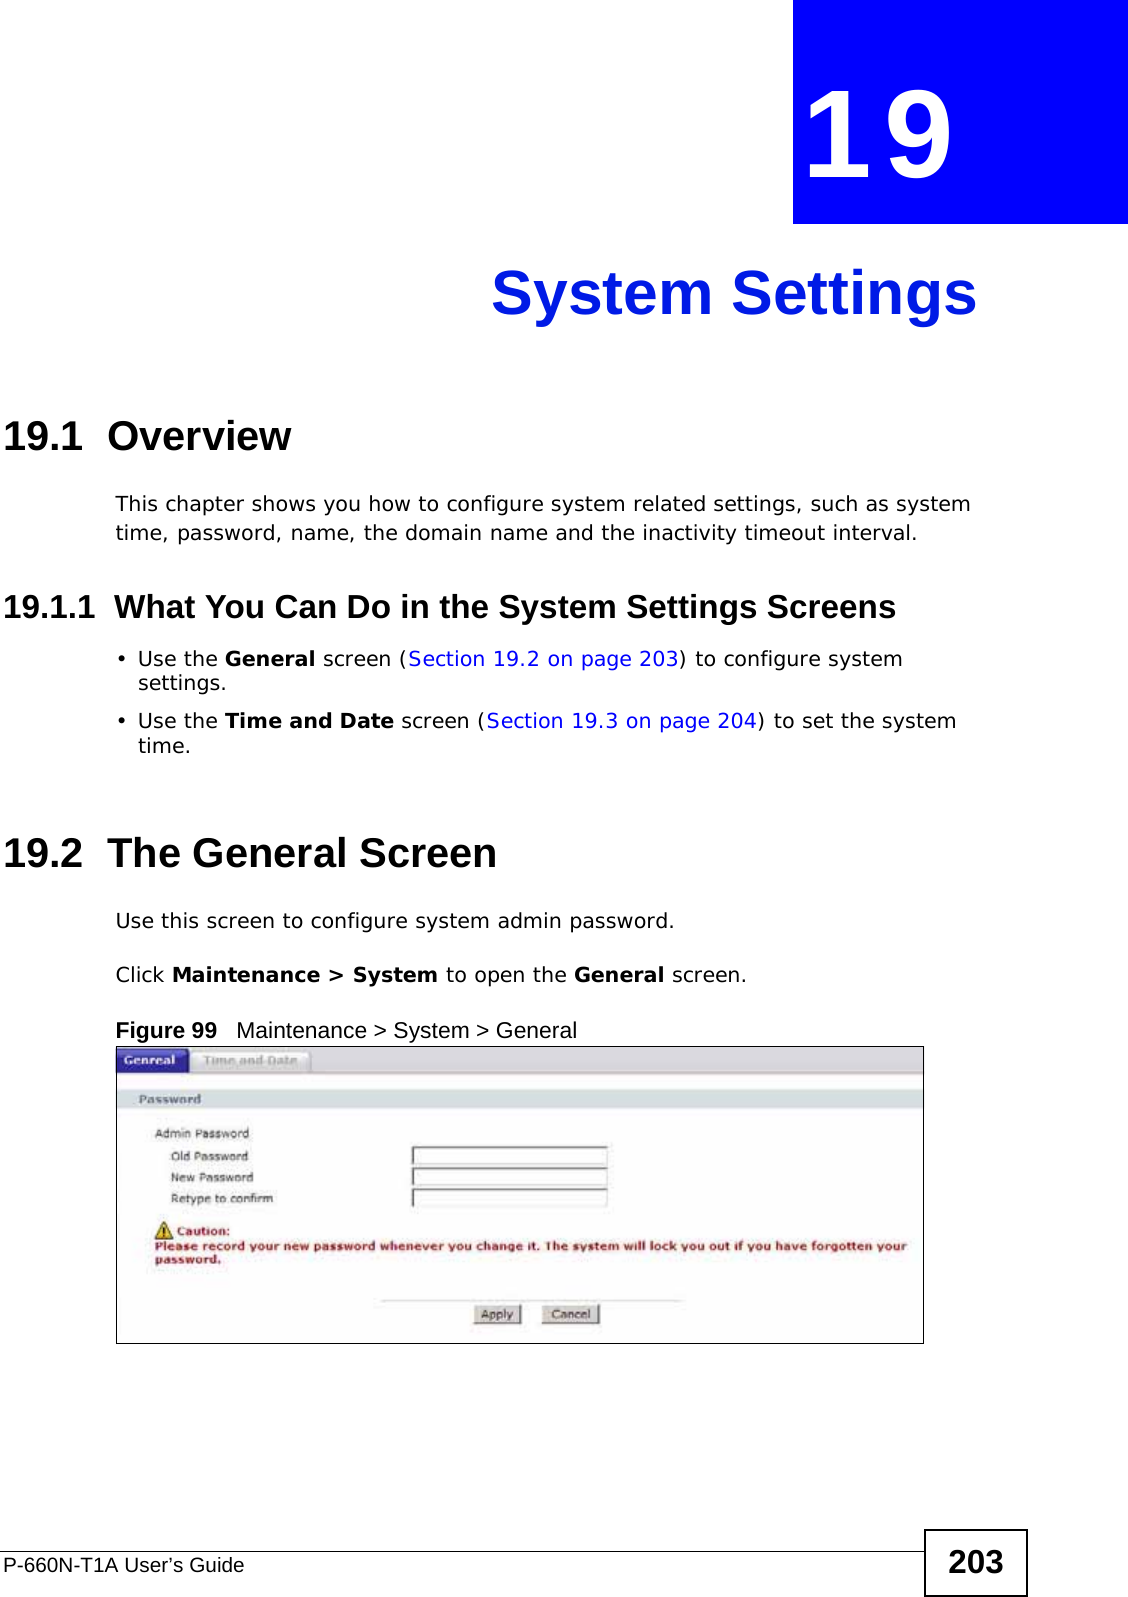 P-660N-T1A User’s Guide 203CHAPTER  19 System Settings19.1  OverviewThis chapter shows you how to configure system related settings, such as system time, password, name, the domain name and the inactivity timeout interval.    19.1.1  What You Can Do in the System Settings Screens•Use the General screen (Section 19.2 on page 203) to configure system settings.•Use the Time and Date screen (Section 19.3 on page 204) to set the system time.19.2  The General ScreenUse this screen to configure system admin password.Click Maintenance &gt; System to open the General screen. Figure 99   Maintenance &gt; System &gt; General